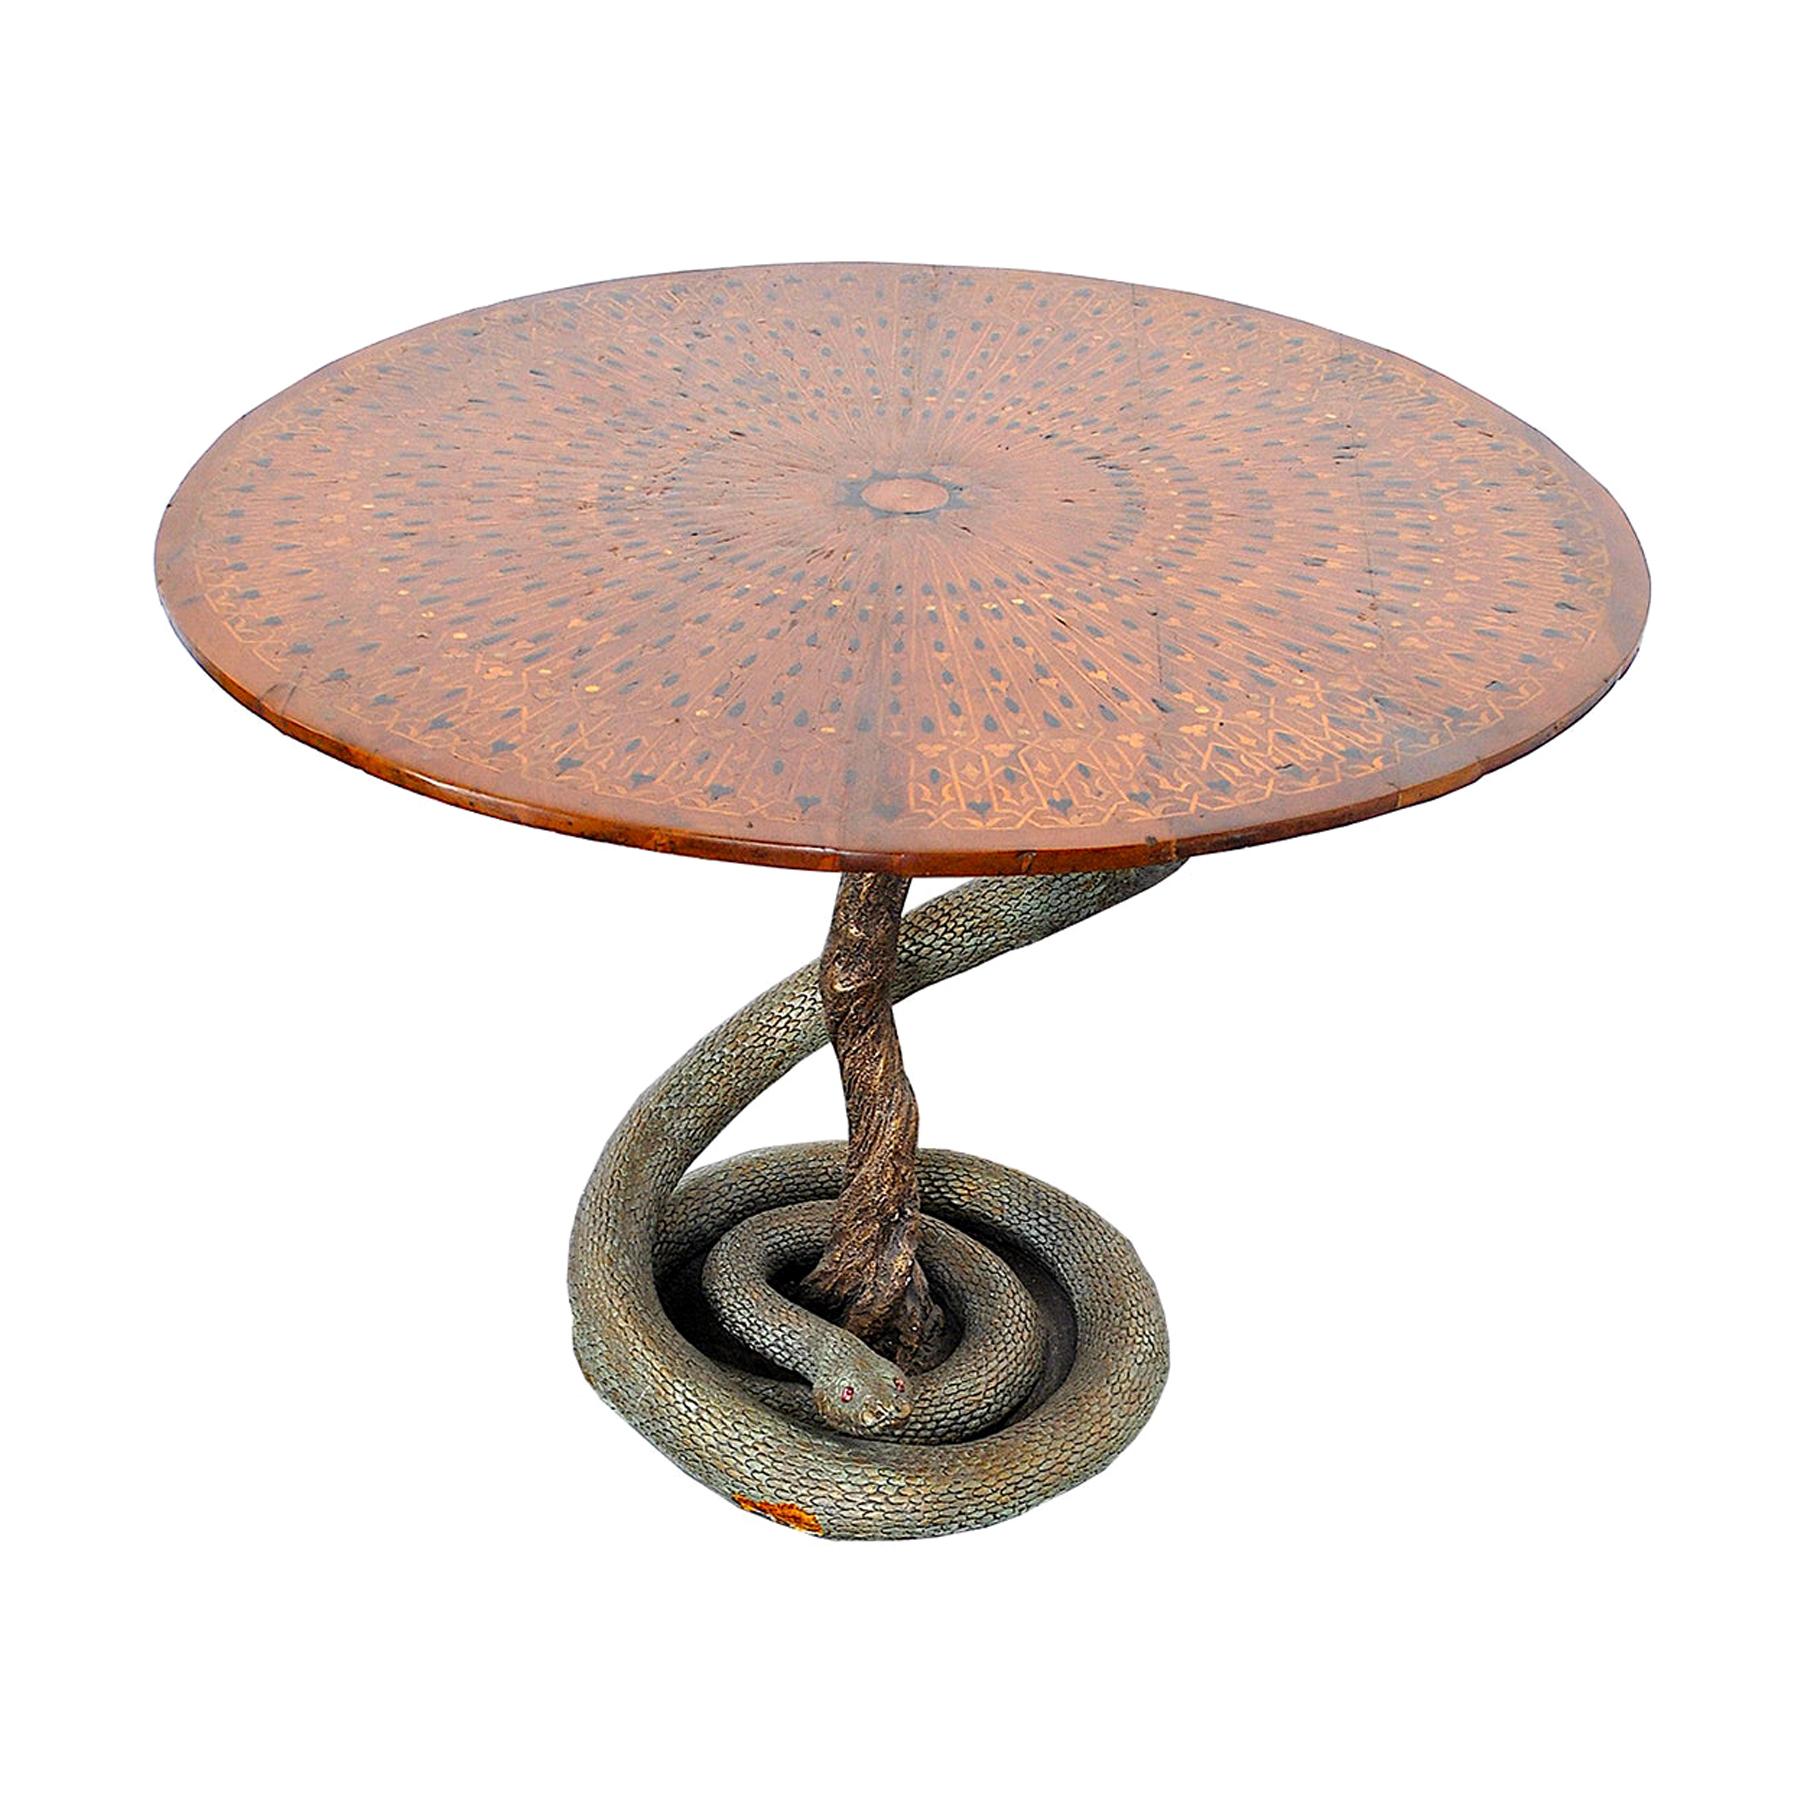 Eclectic Game Table with Python Sculpture from the Fifties For Sale